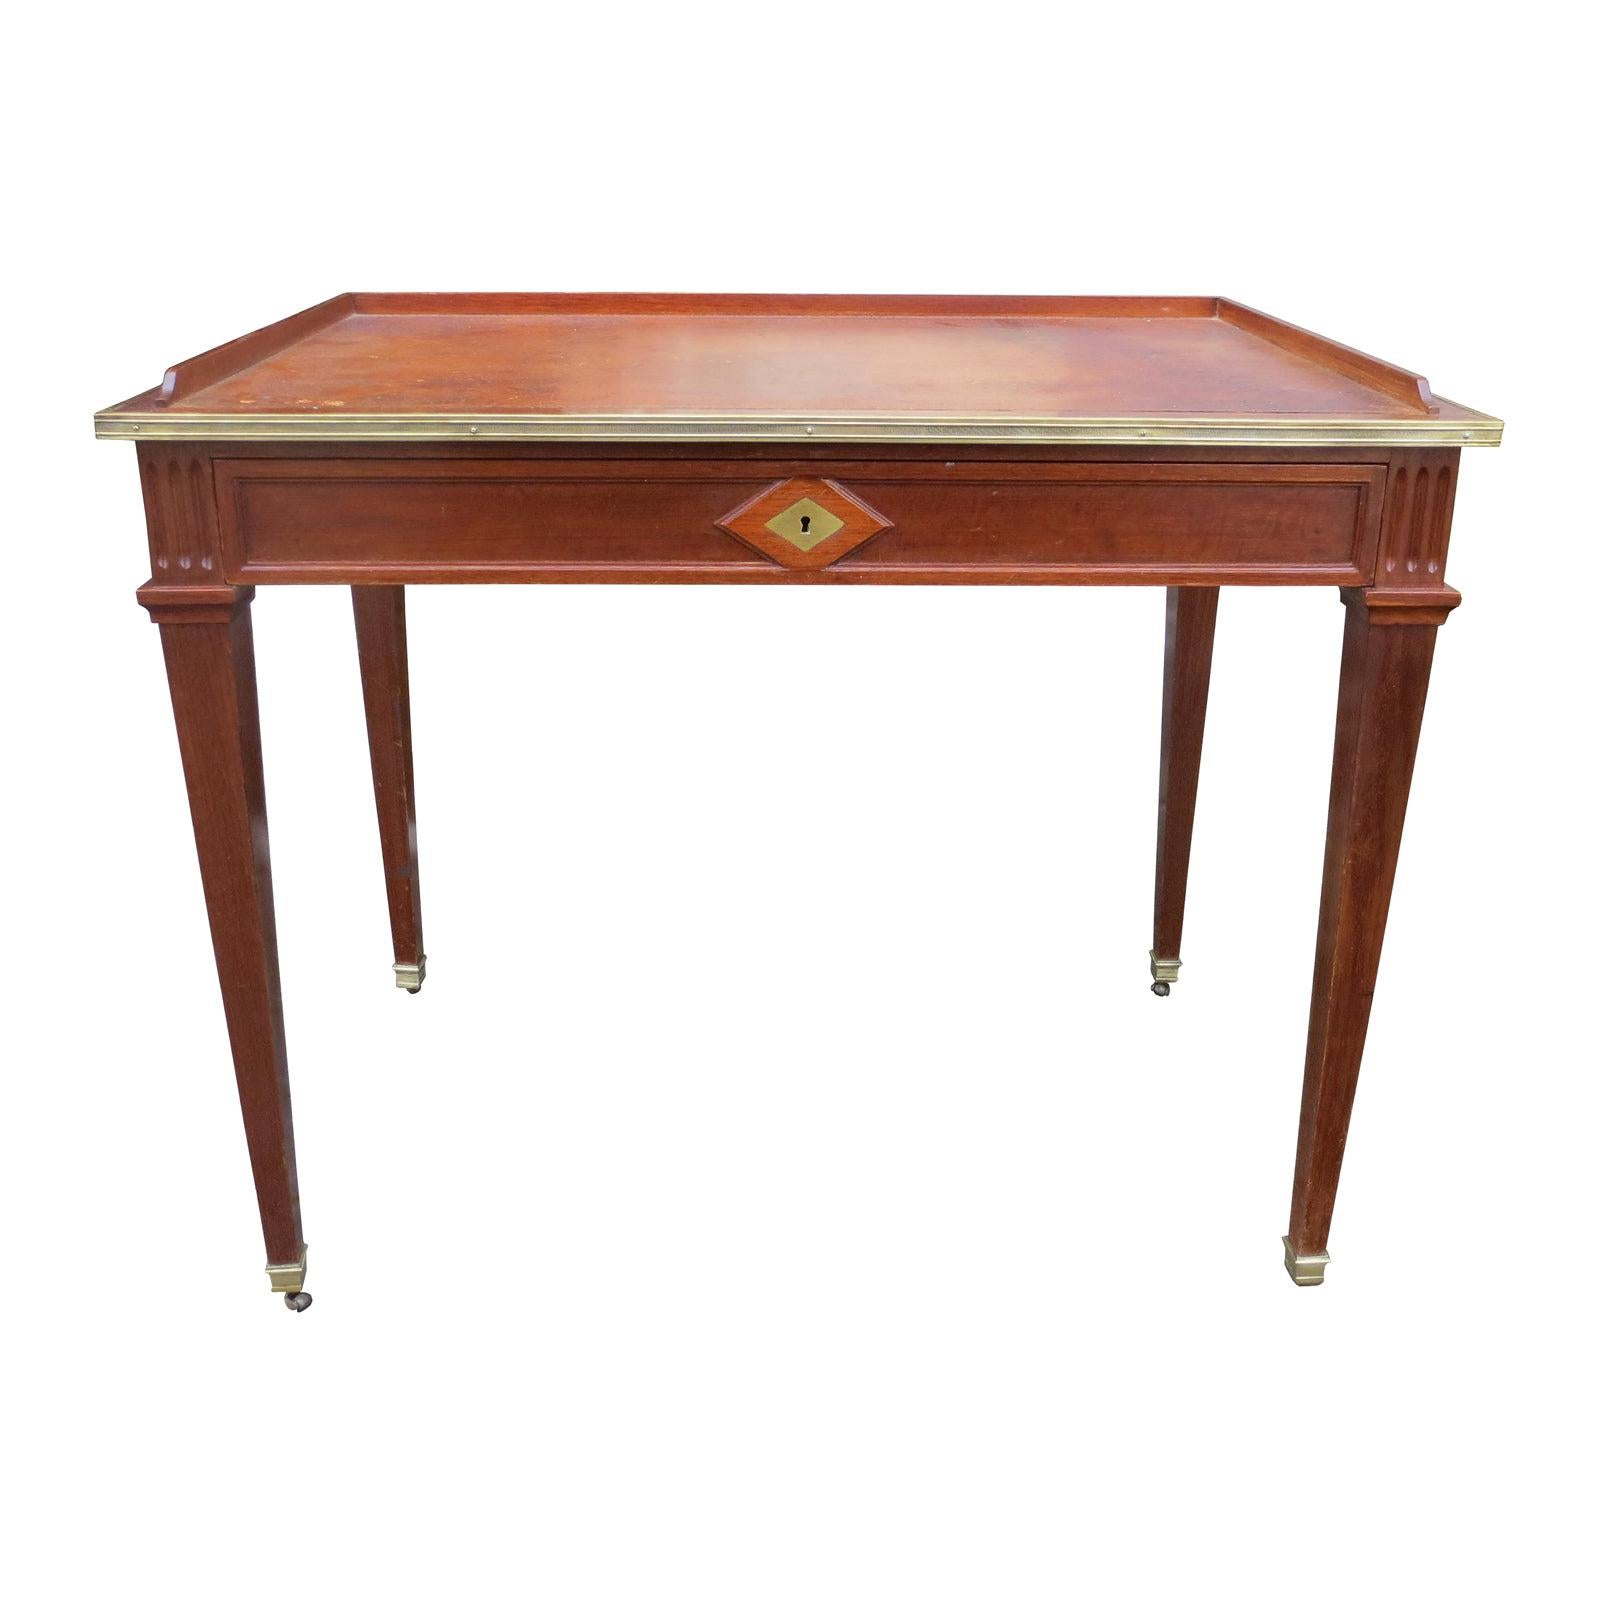 19th Century Neoclassical Continental Leather Top Writing Table/Desk For Sale